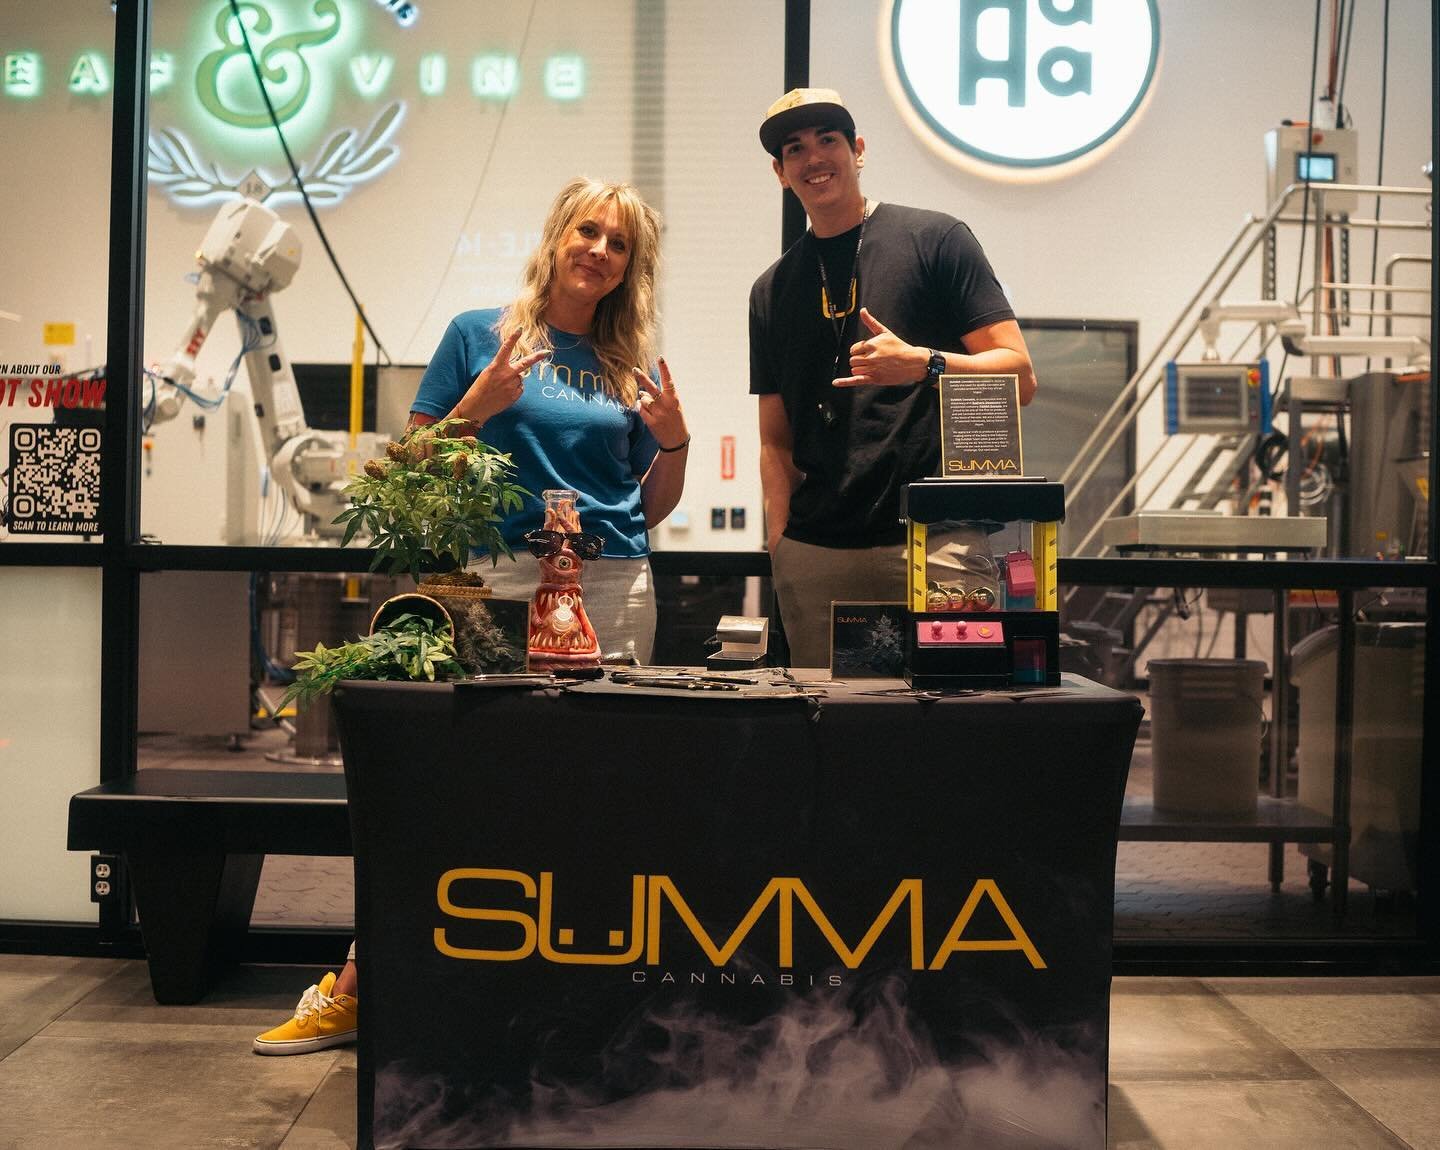 Flashback Friday from our awesome 4/20 event @planet13stores 

Keep out of reach of children. For use only by adults 21 years of age or older. Summa Cannabis NV ID: RC072. NFS. 

#chill #instarelax  #quality #lasvegas #nevada #lasvegaslocally #likefo